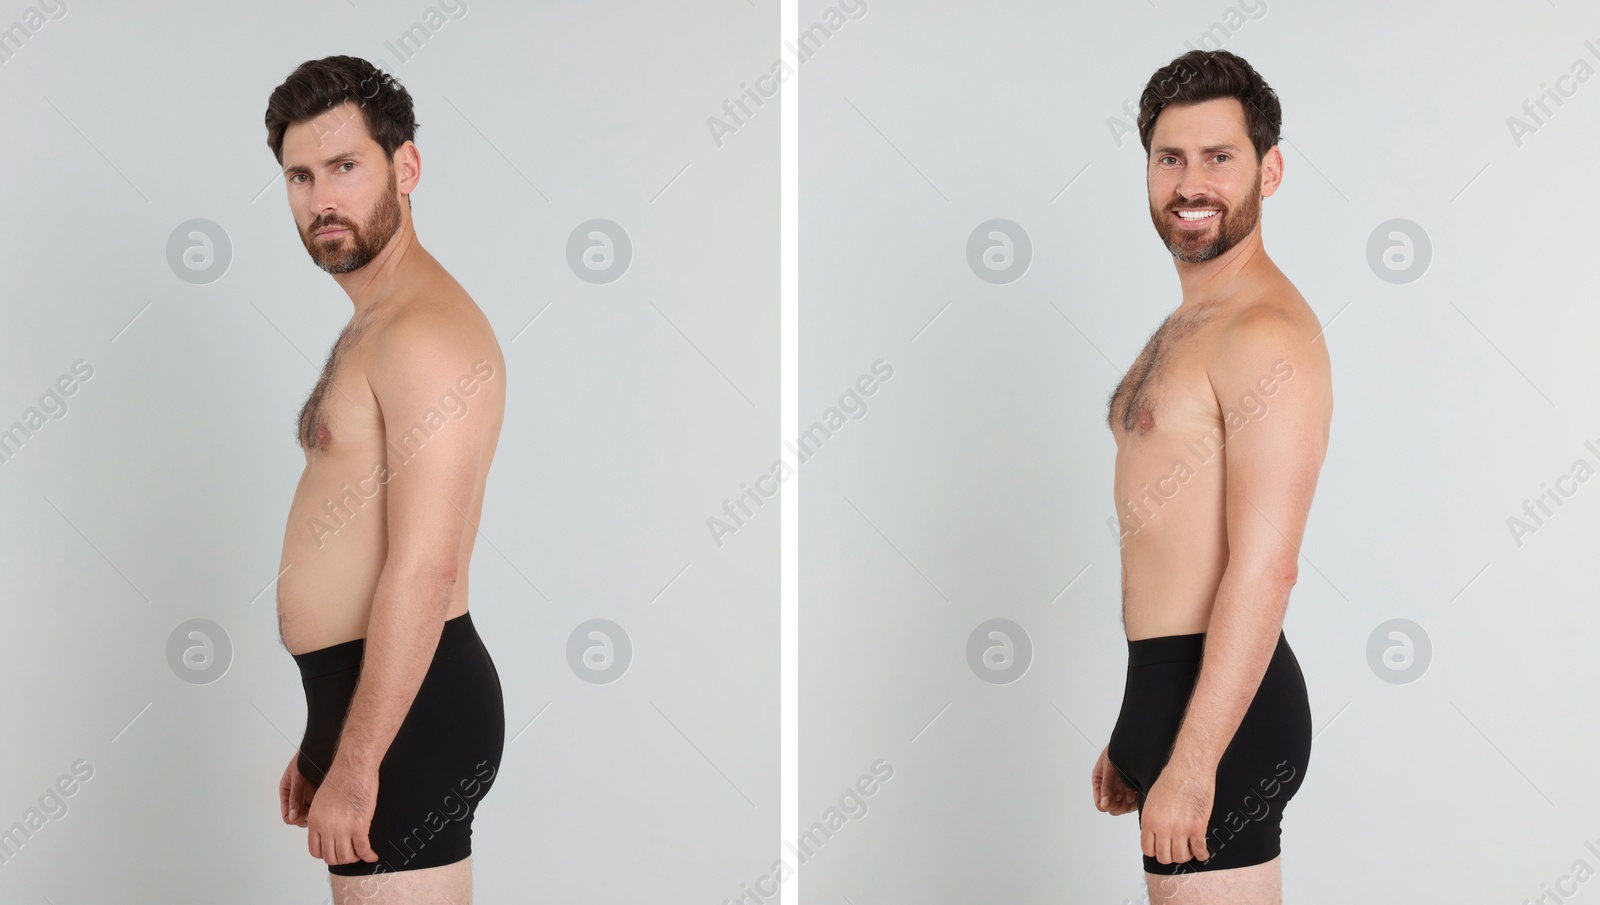 Image of Collage with portraits of man before and after weight loss on light background